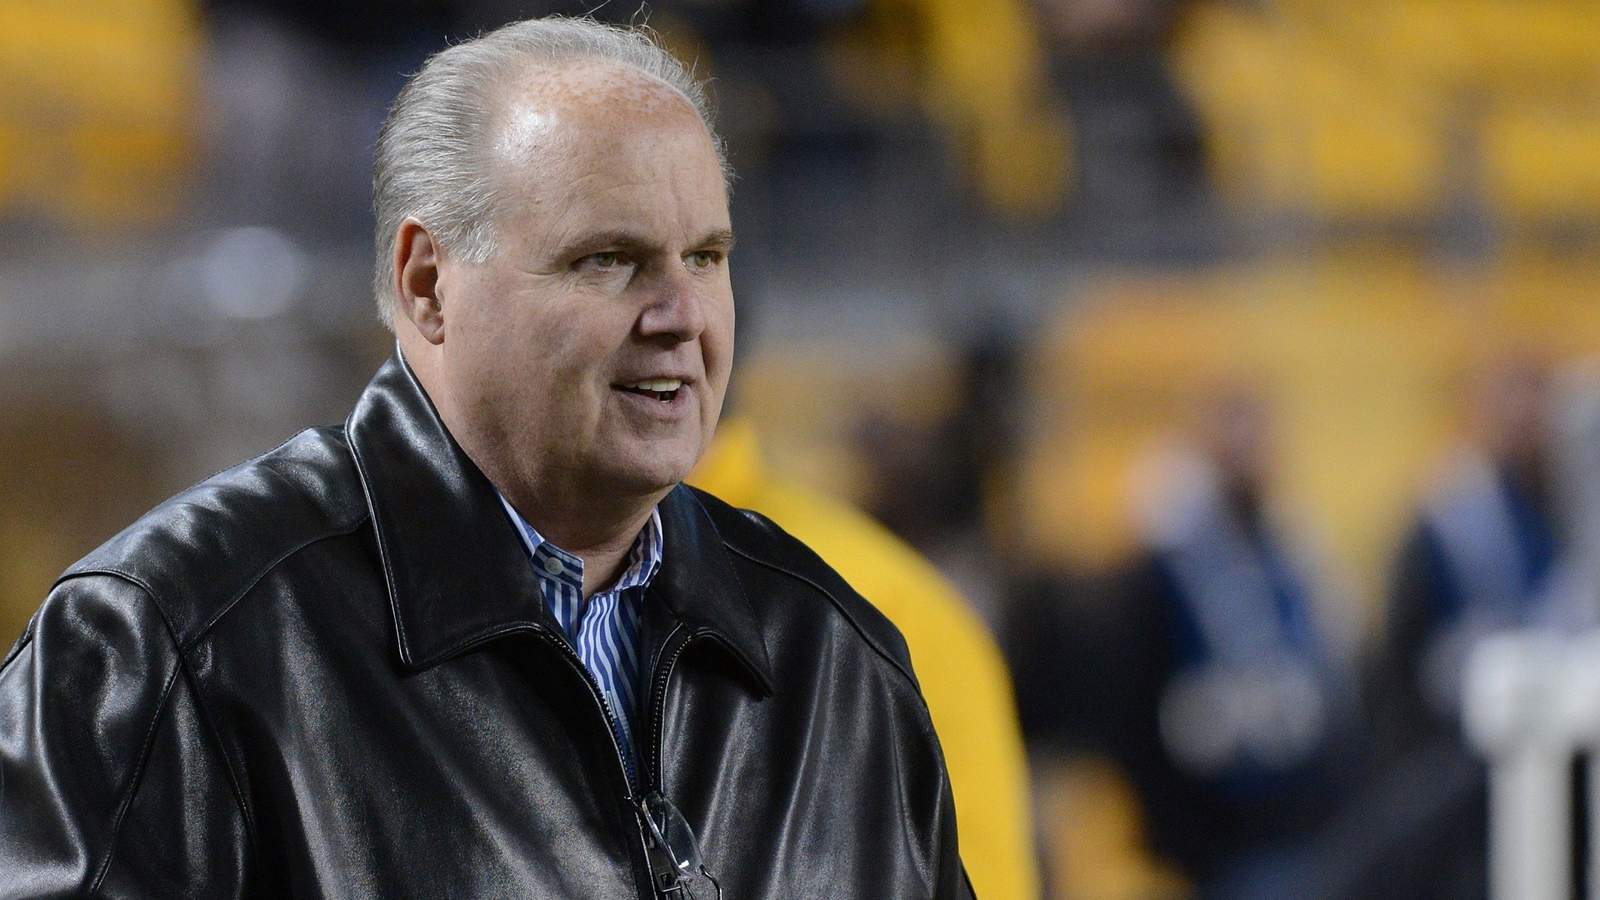 'I can’t help but feel that I’m letting everybody down’: Rush Limbaugh announces advanced lung cancer diagnosis